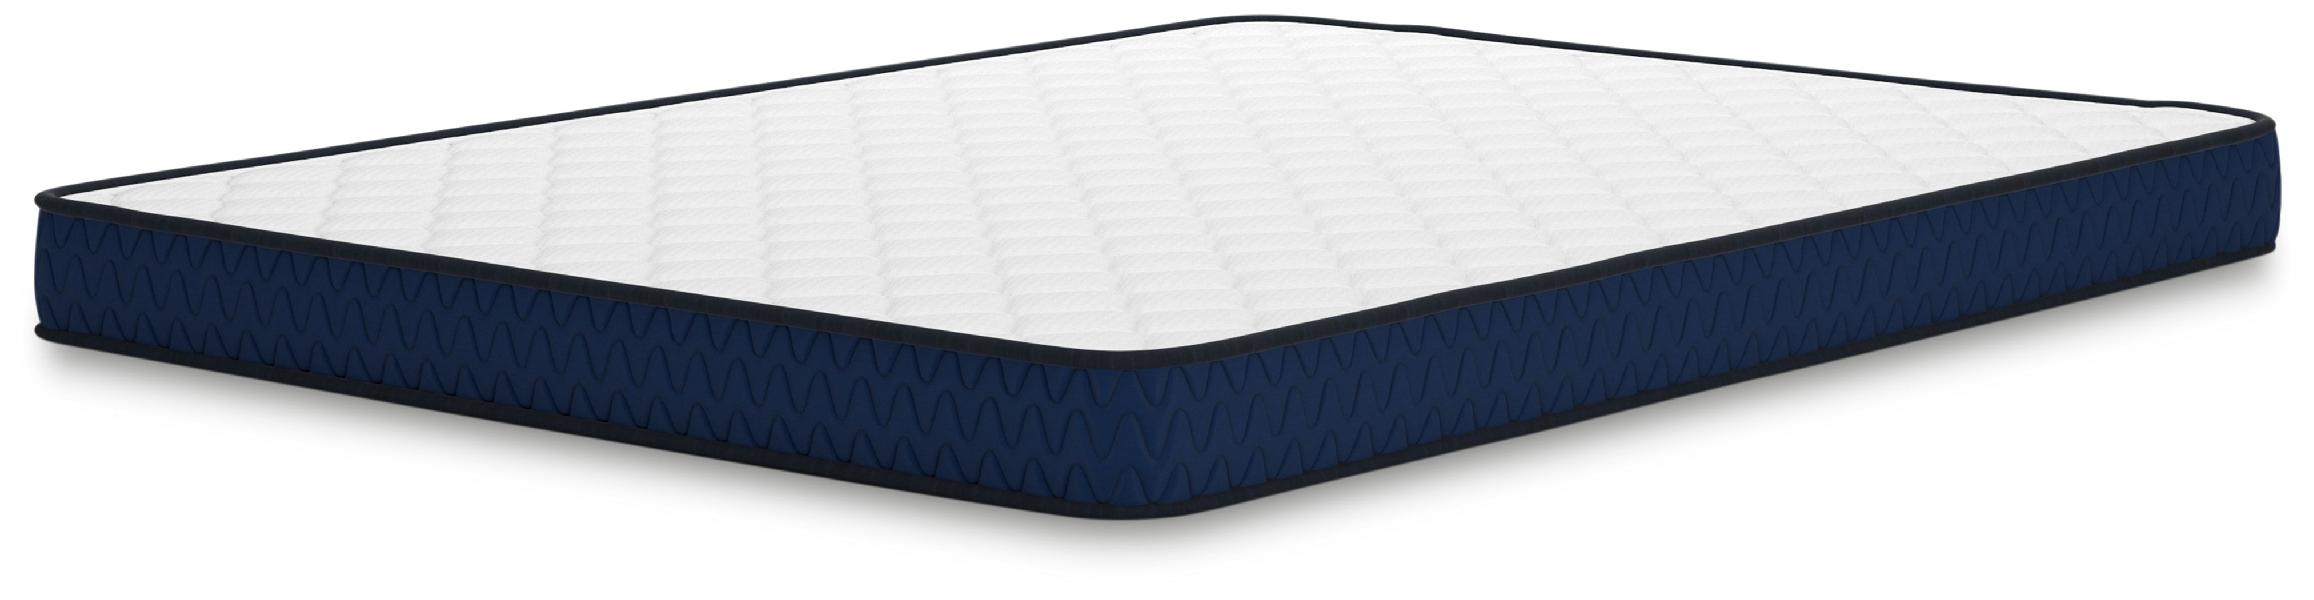 Image of Ashley Firm - White - Queen Mattress